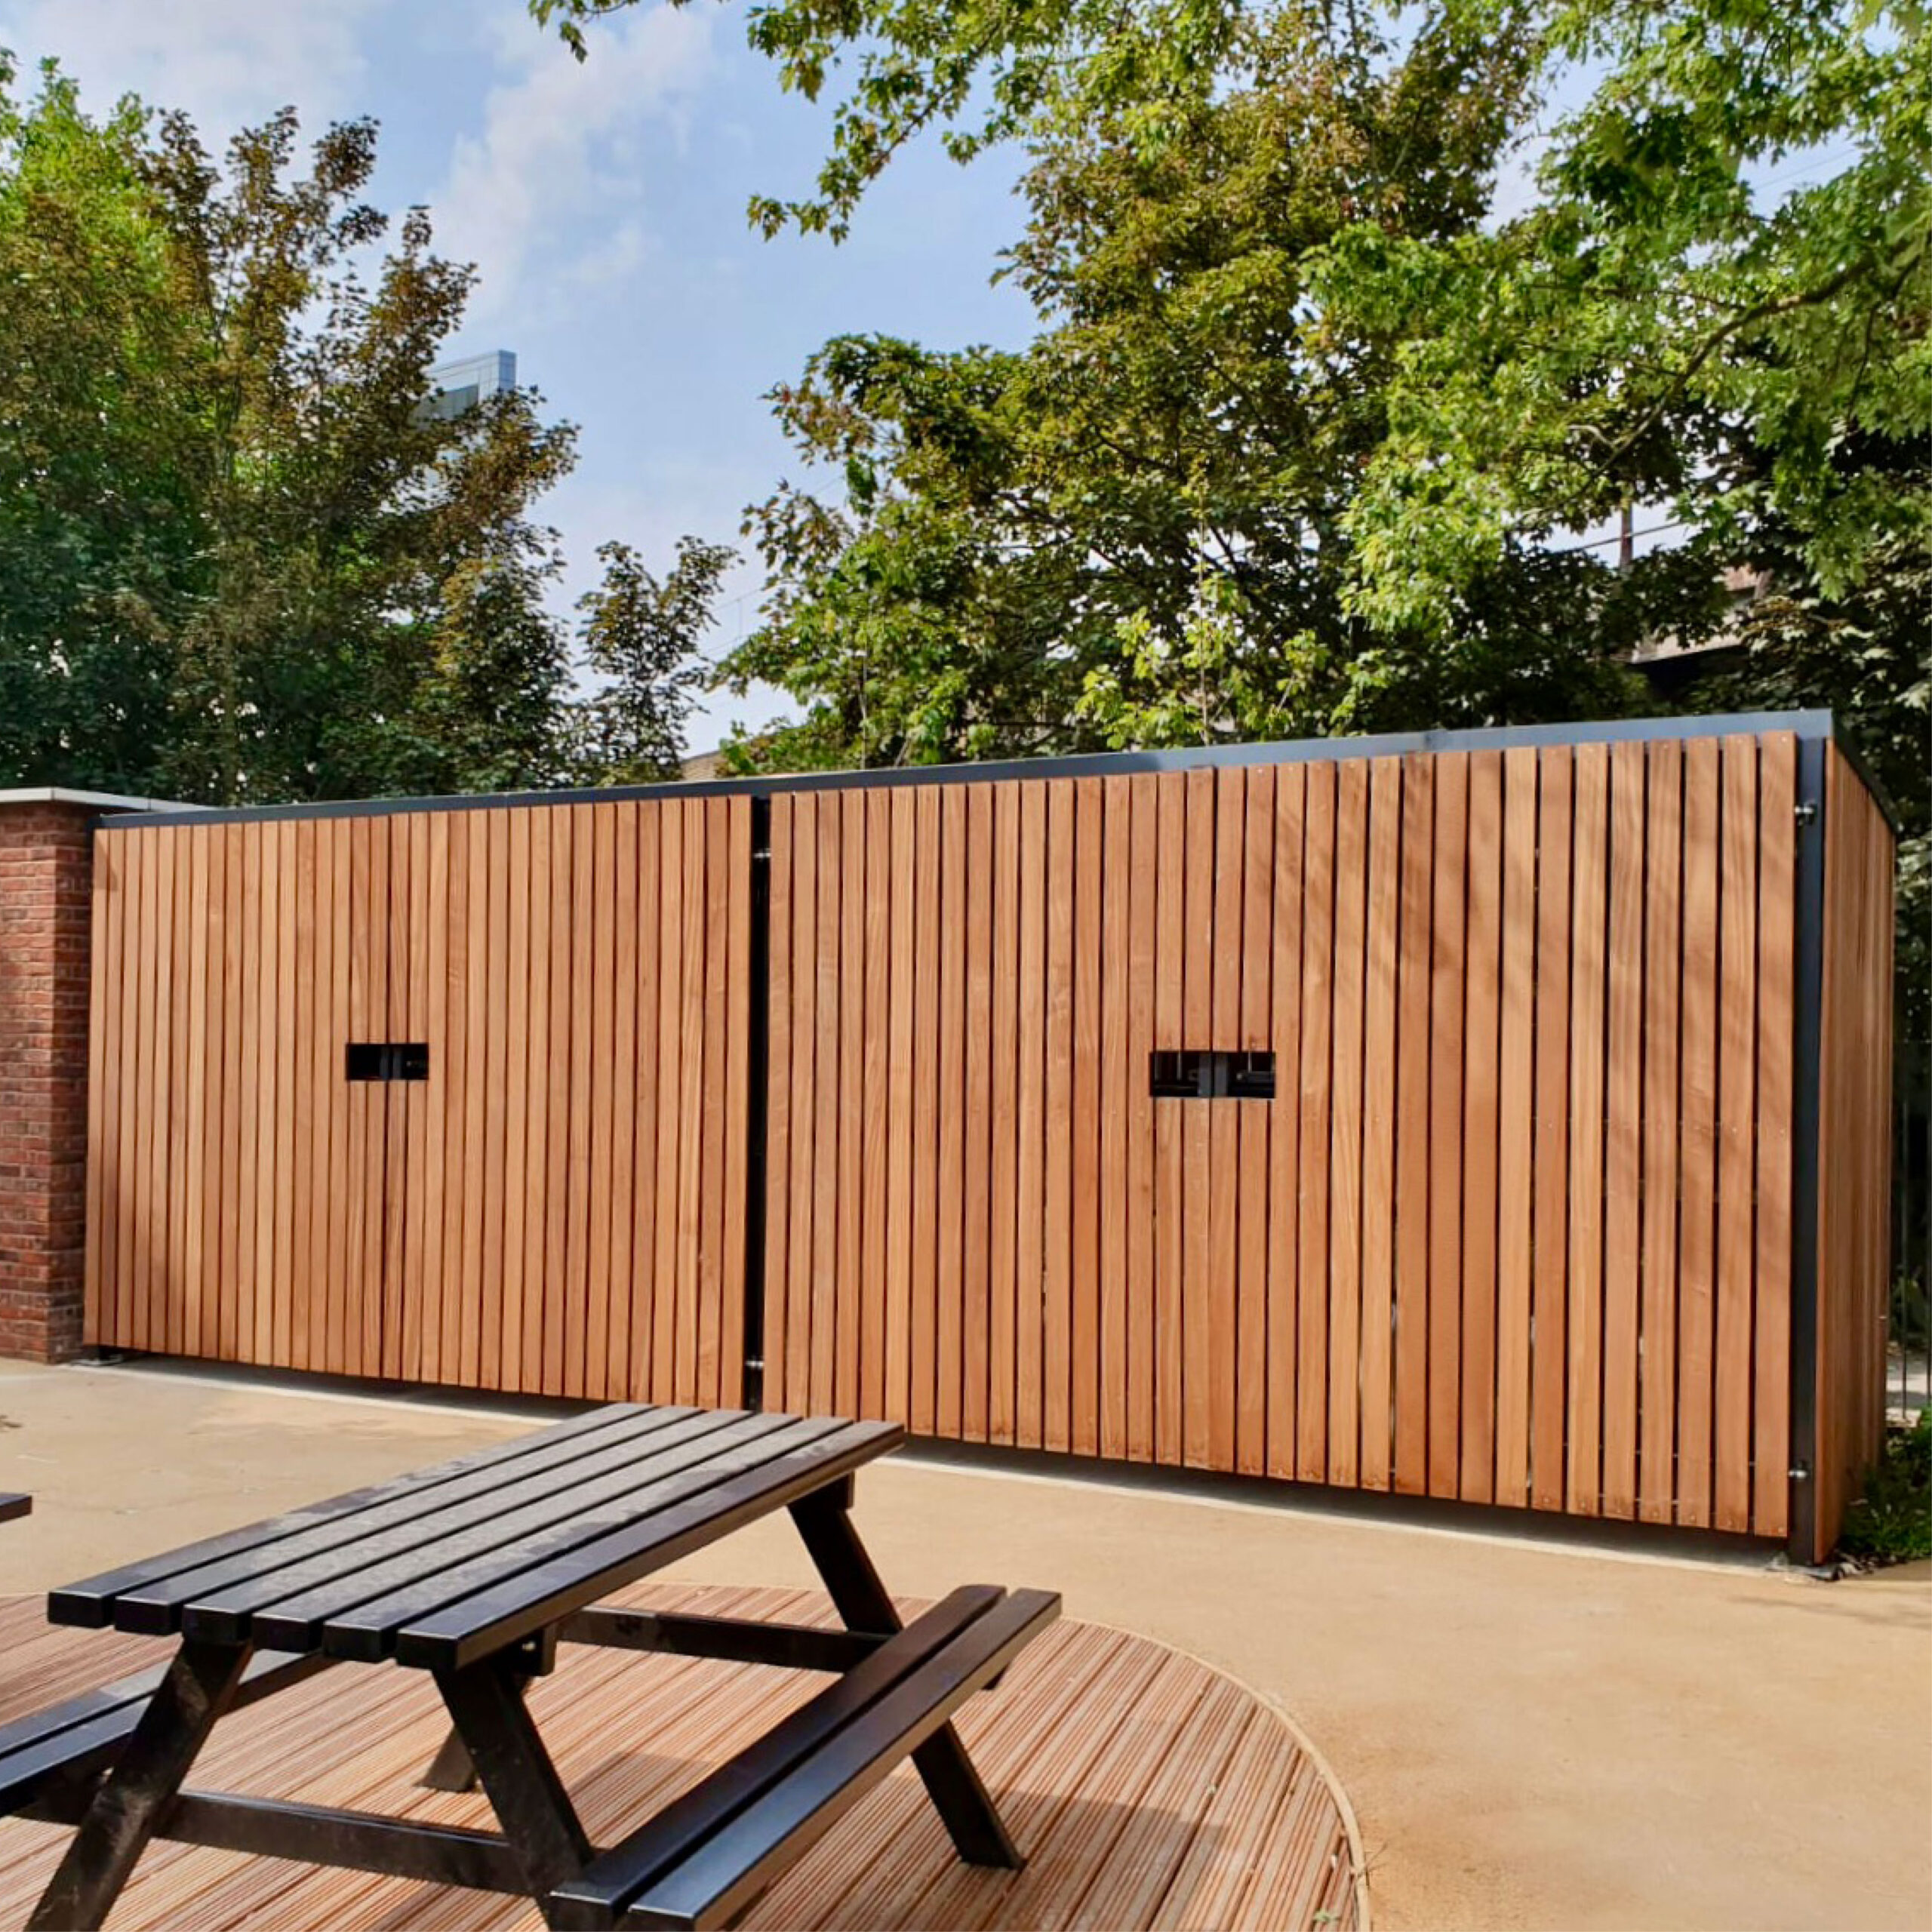 A modern wooden bike storage with small, square windows, situated behind a picnic table on a circular deck in a sunny outdoor area with trees.